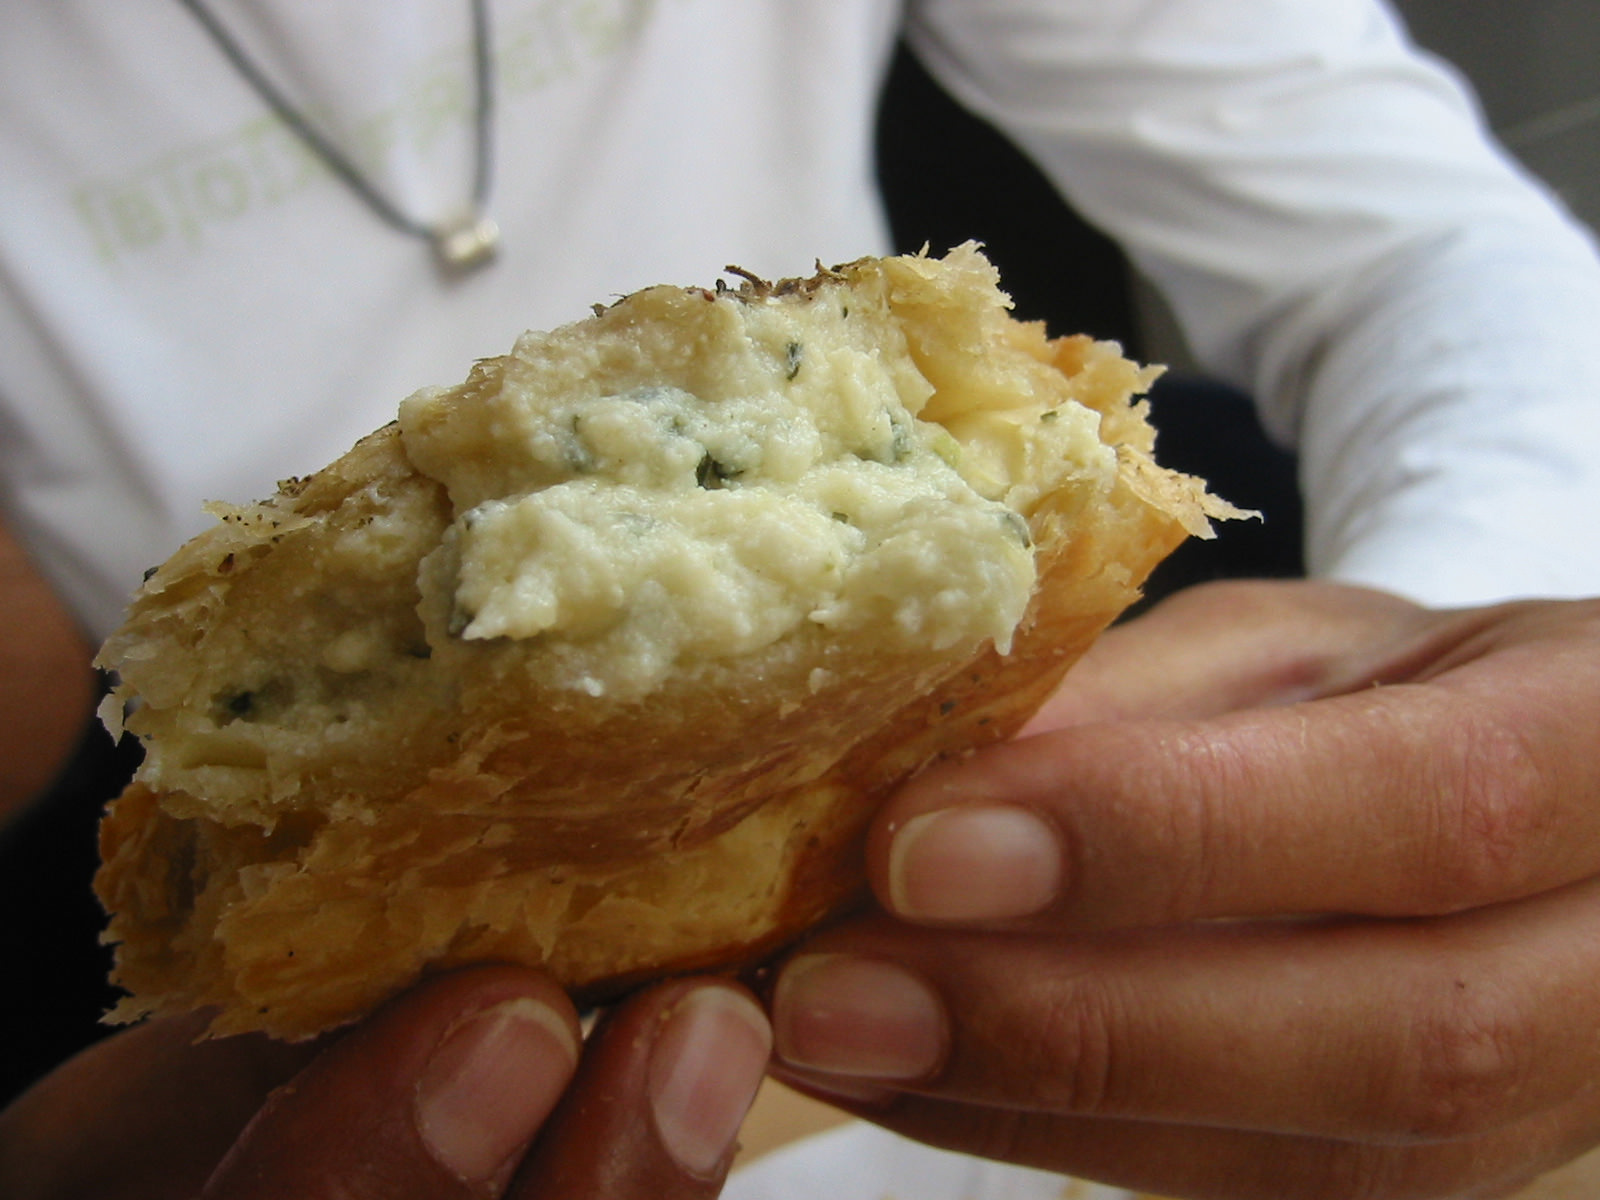 VR's spinach and ricotta pastry innards